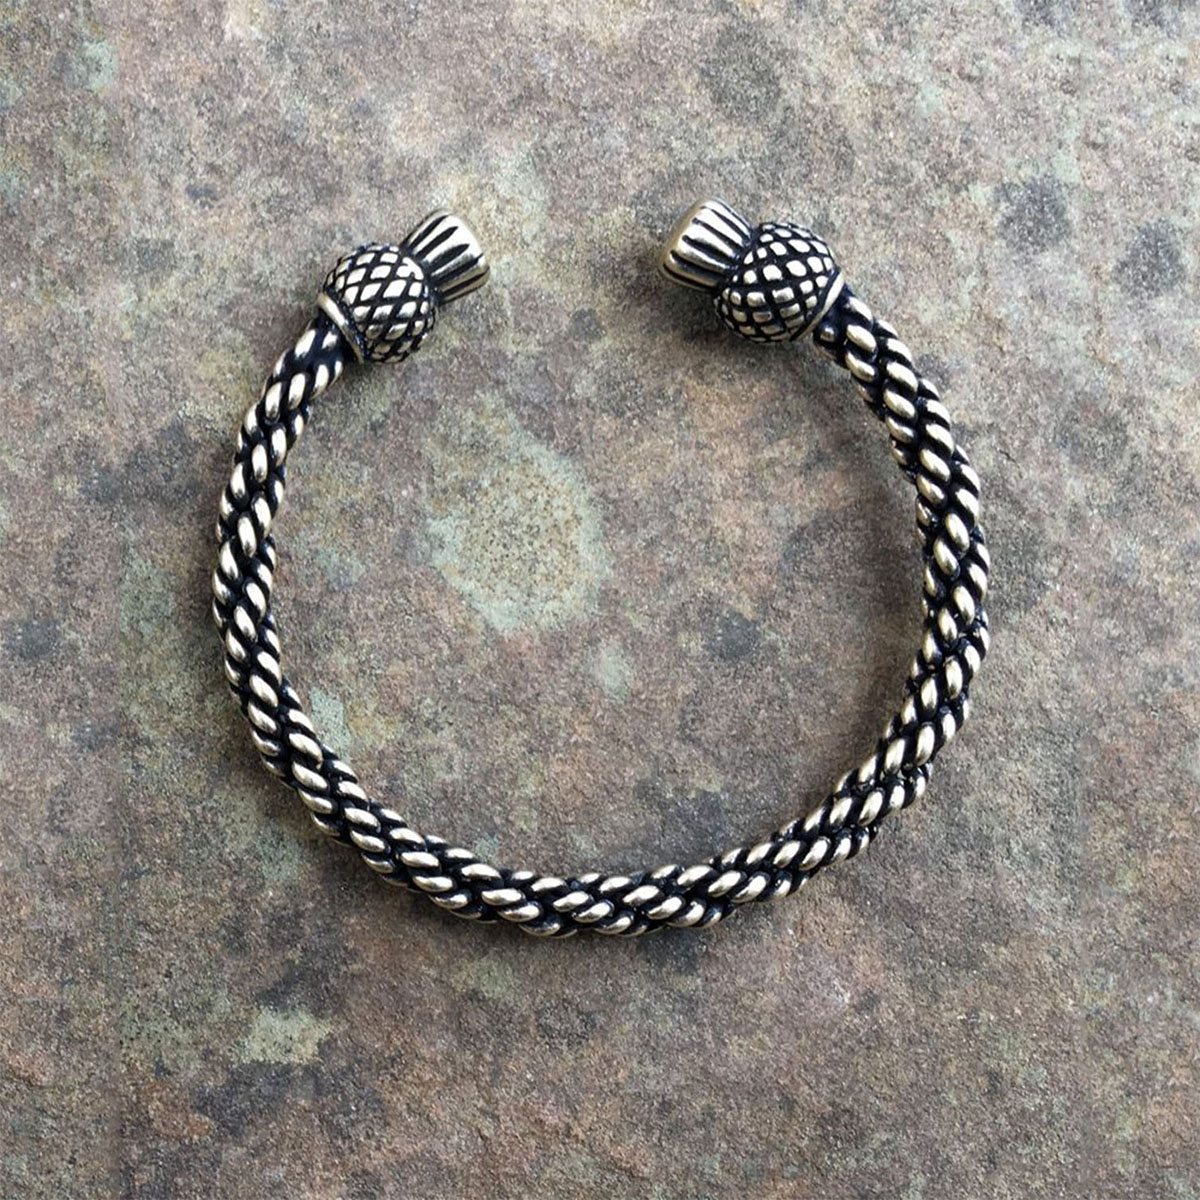 A black and white Celtic Thistle Torc Bracelet on a stone.